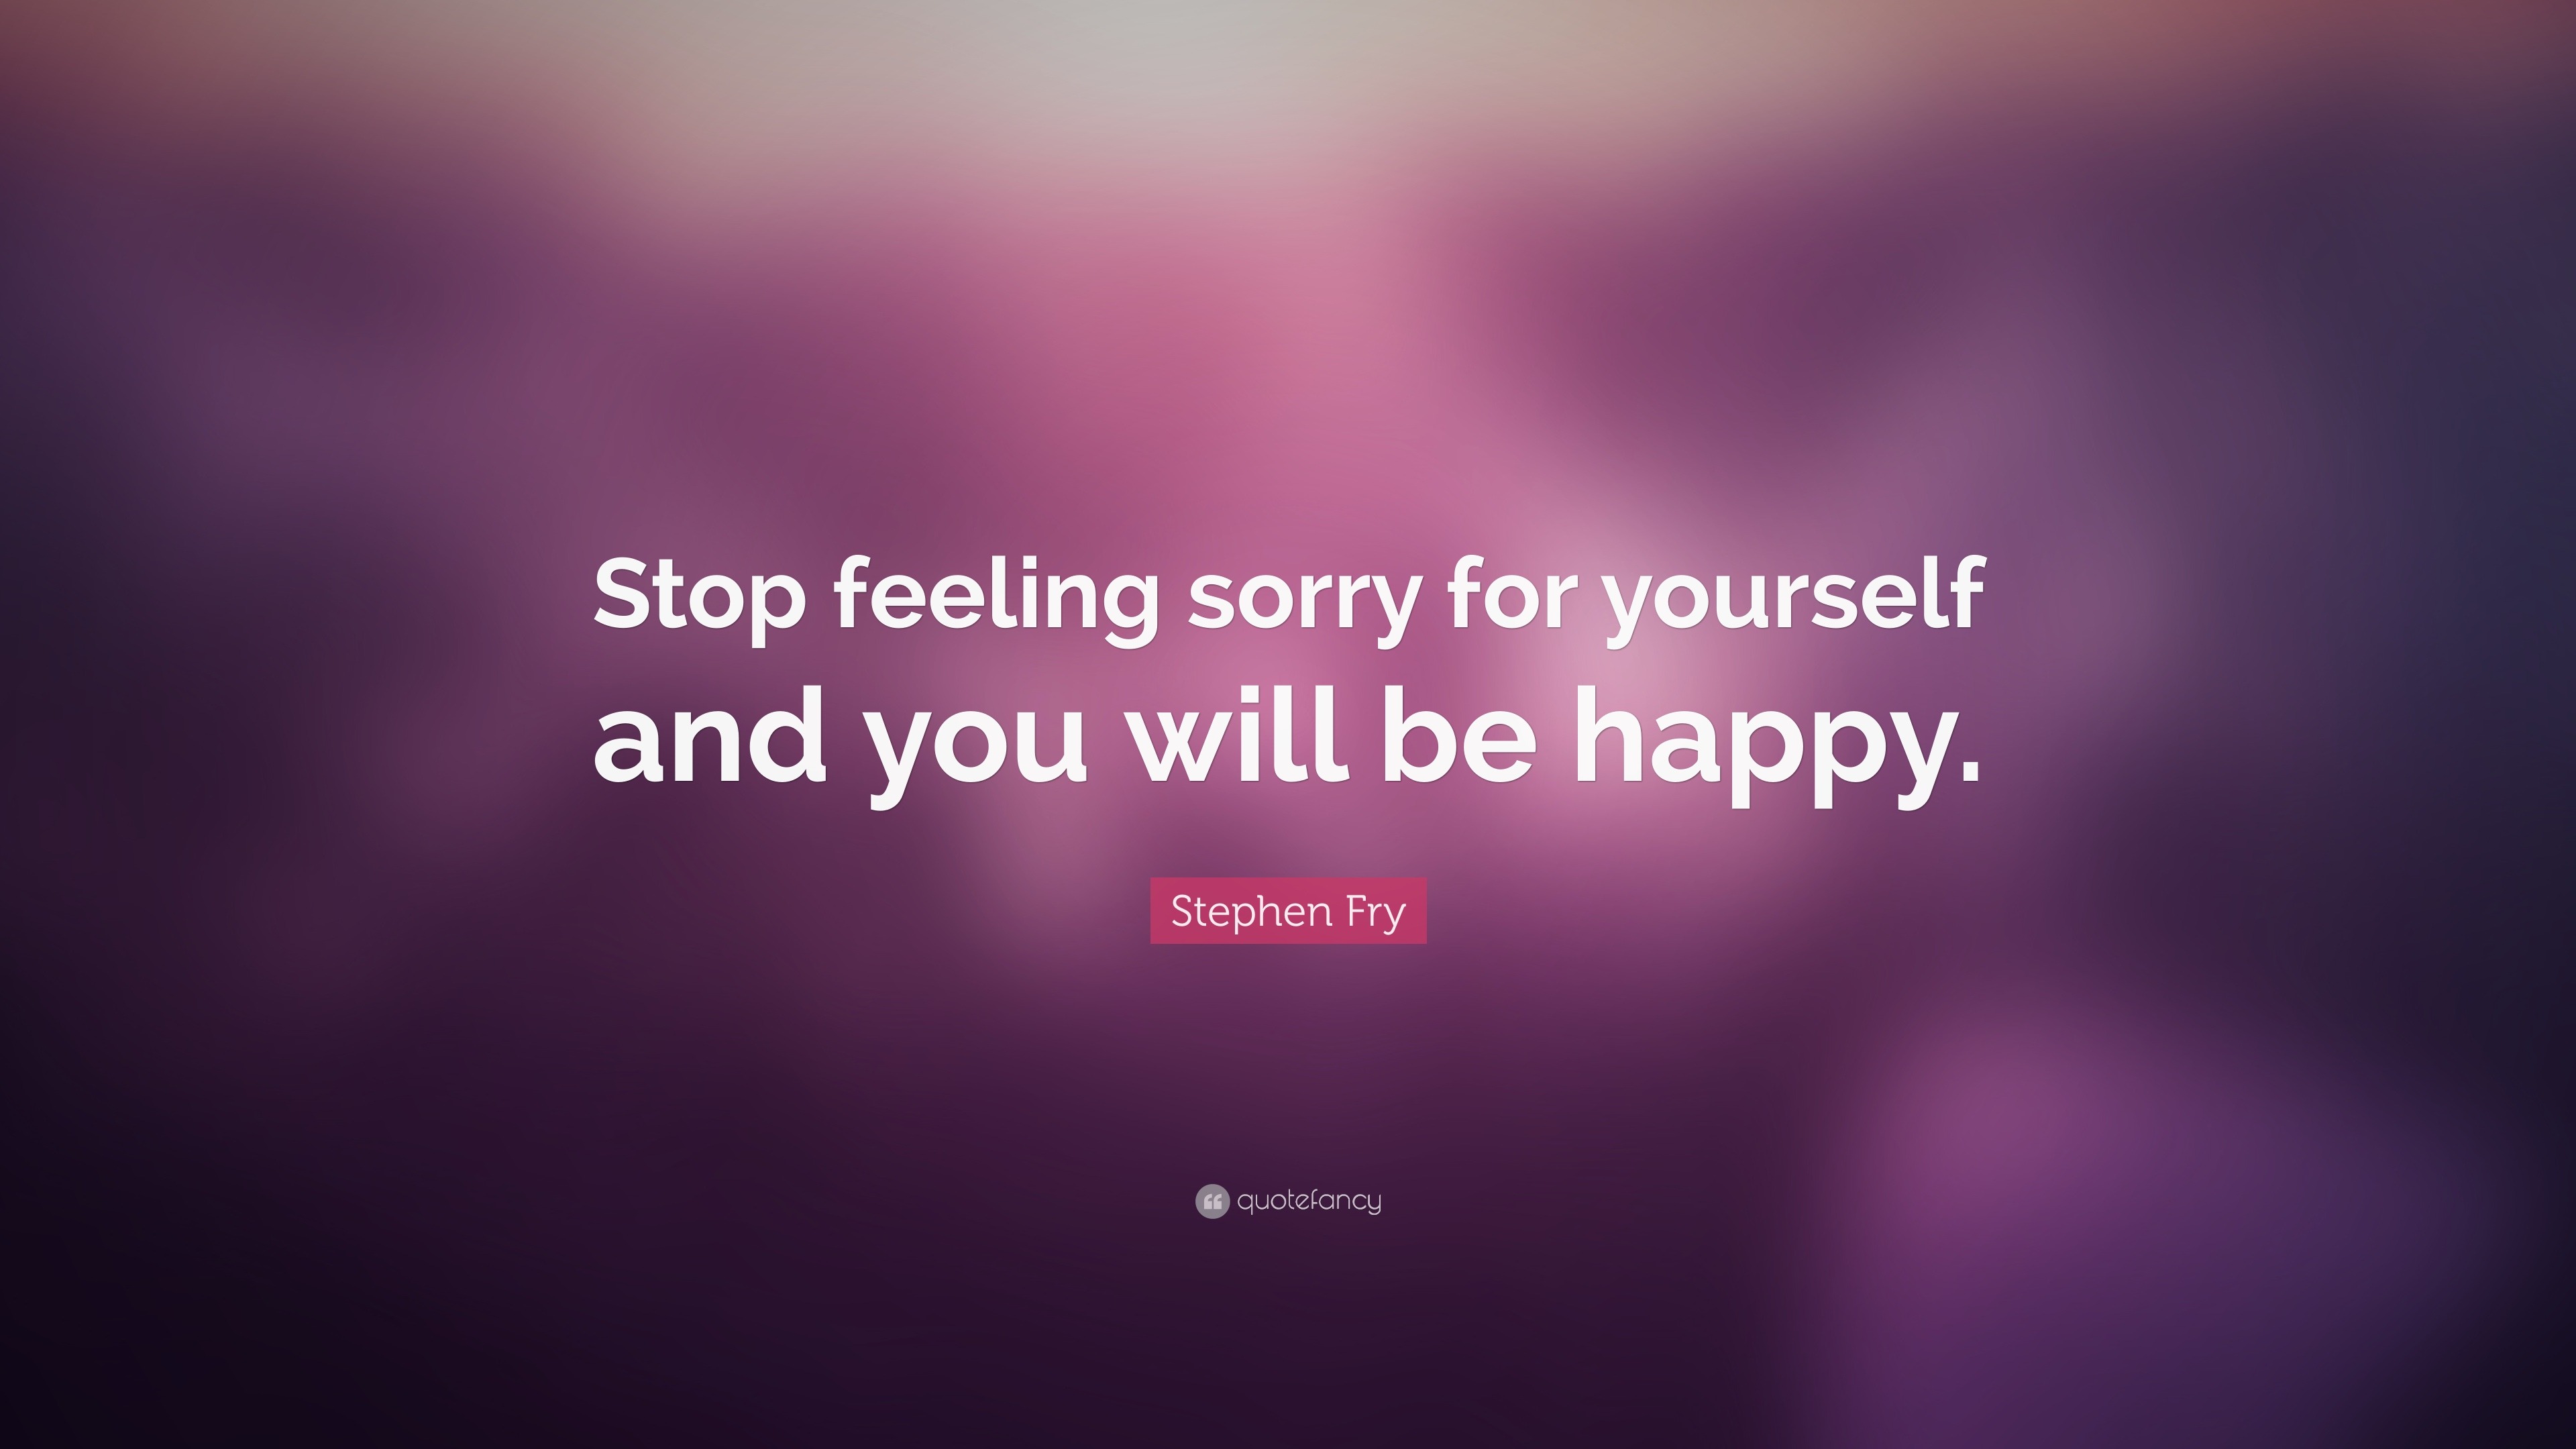 Stephen Fry Quote: “Stop Feeling Sorry For Yourself And You Will Be Happy.”